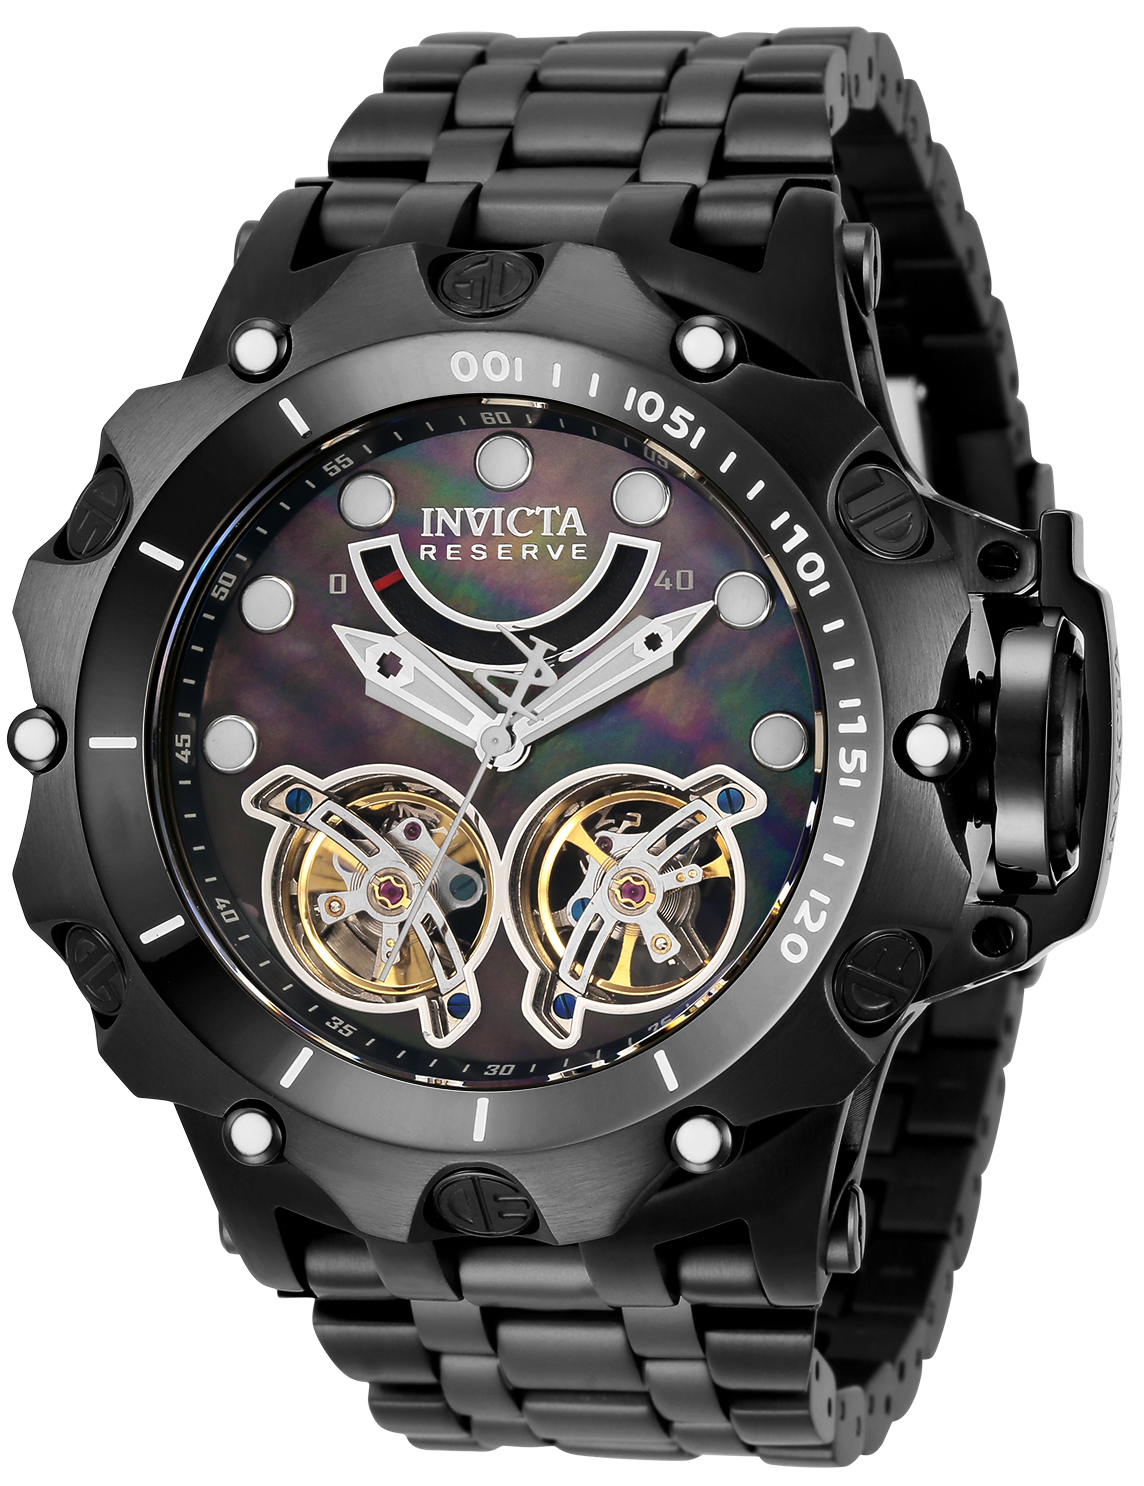 Invicta Reserve Venom Automatic Mens Watch - 51mm Stainless Steel Case, Stainless Steel Band, Black (33554)